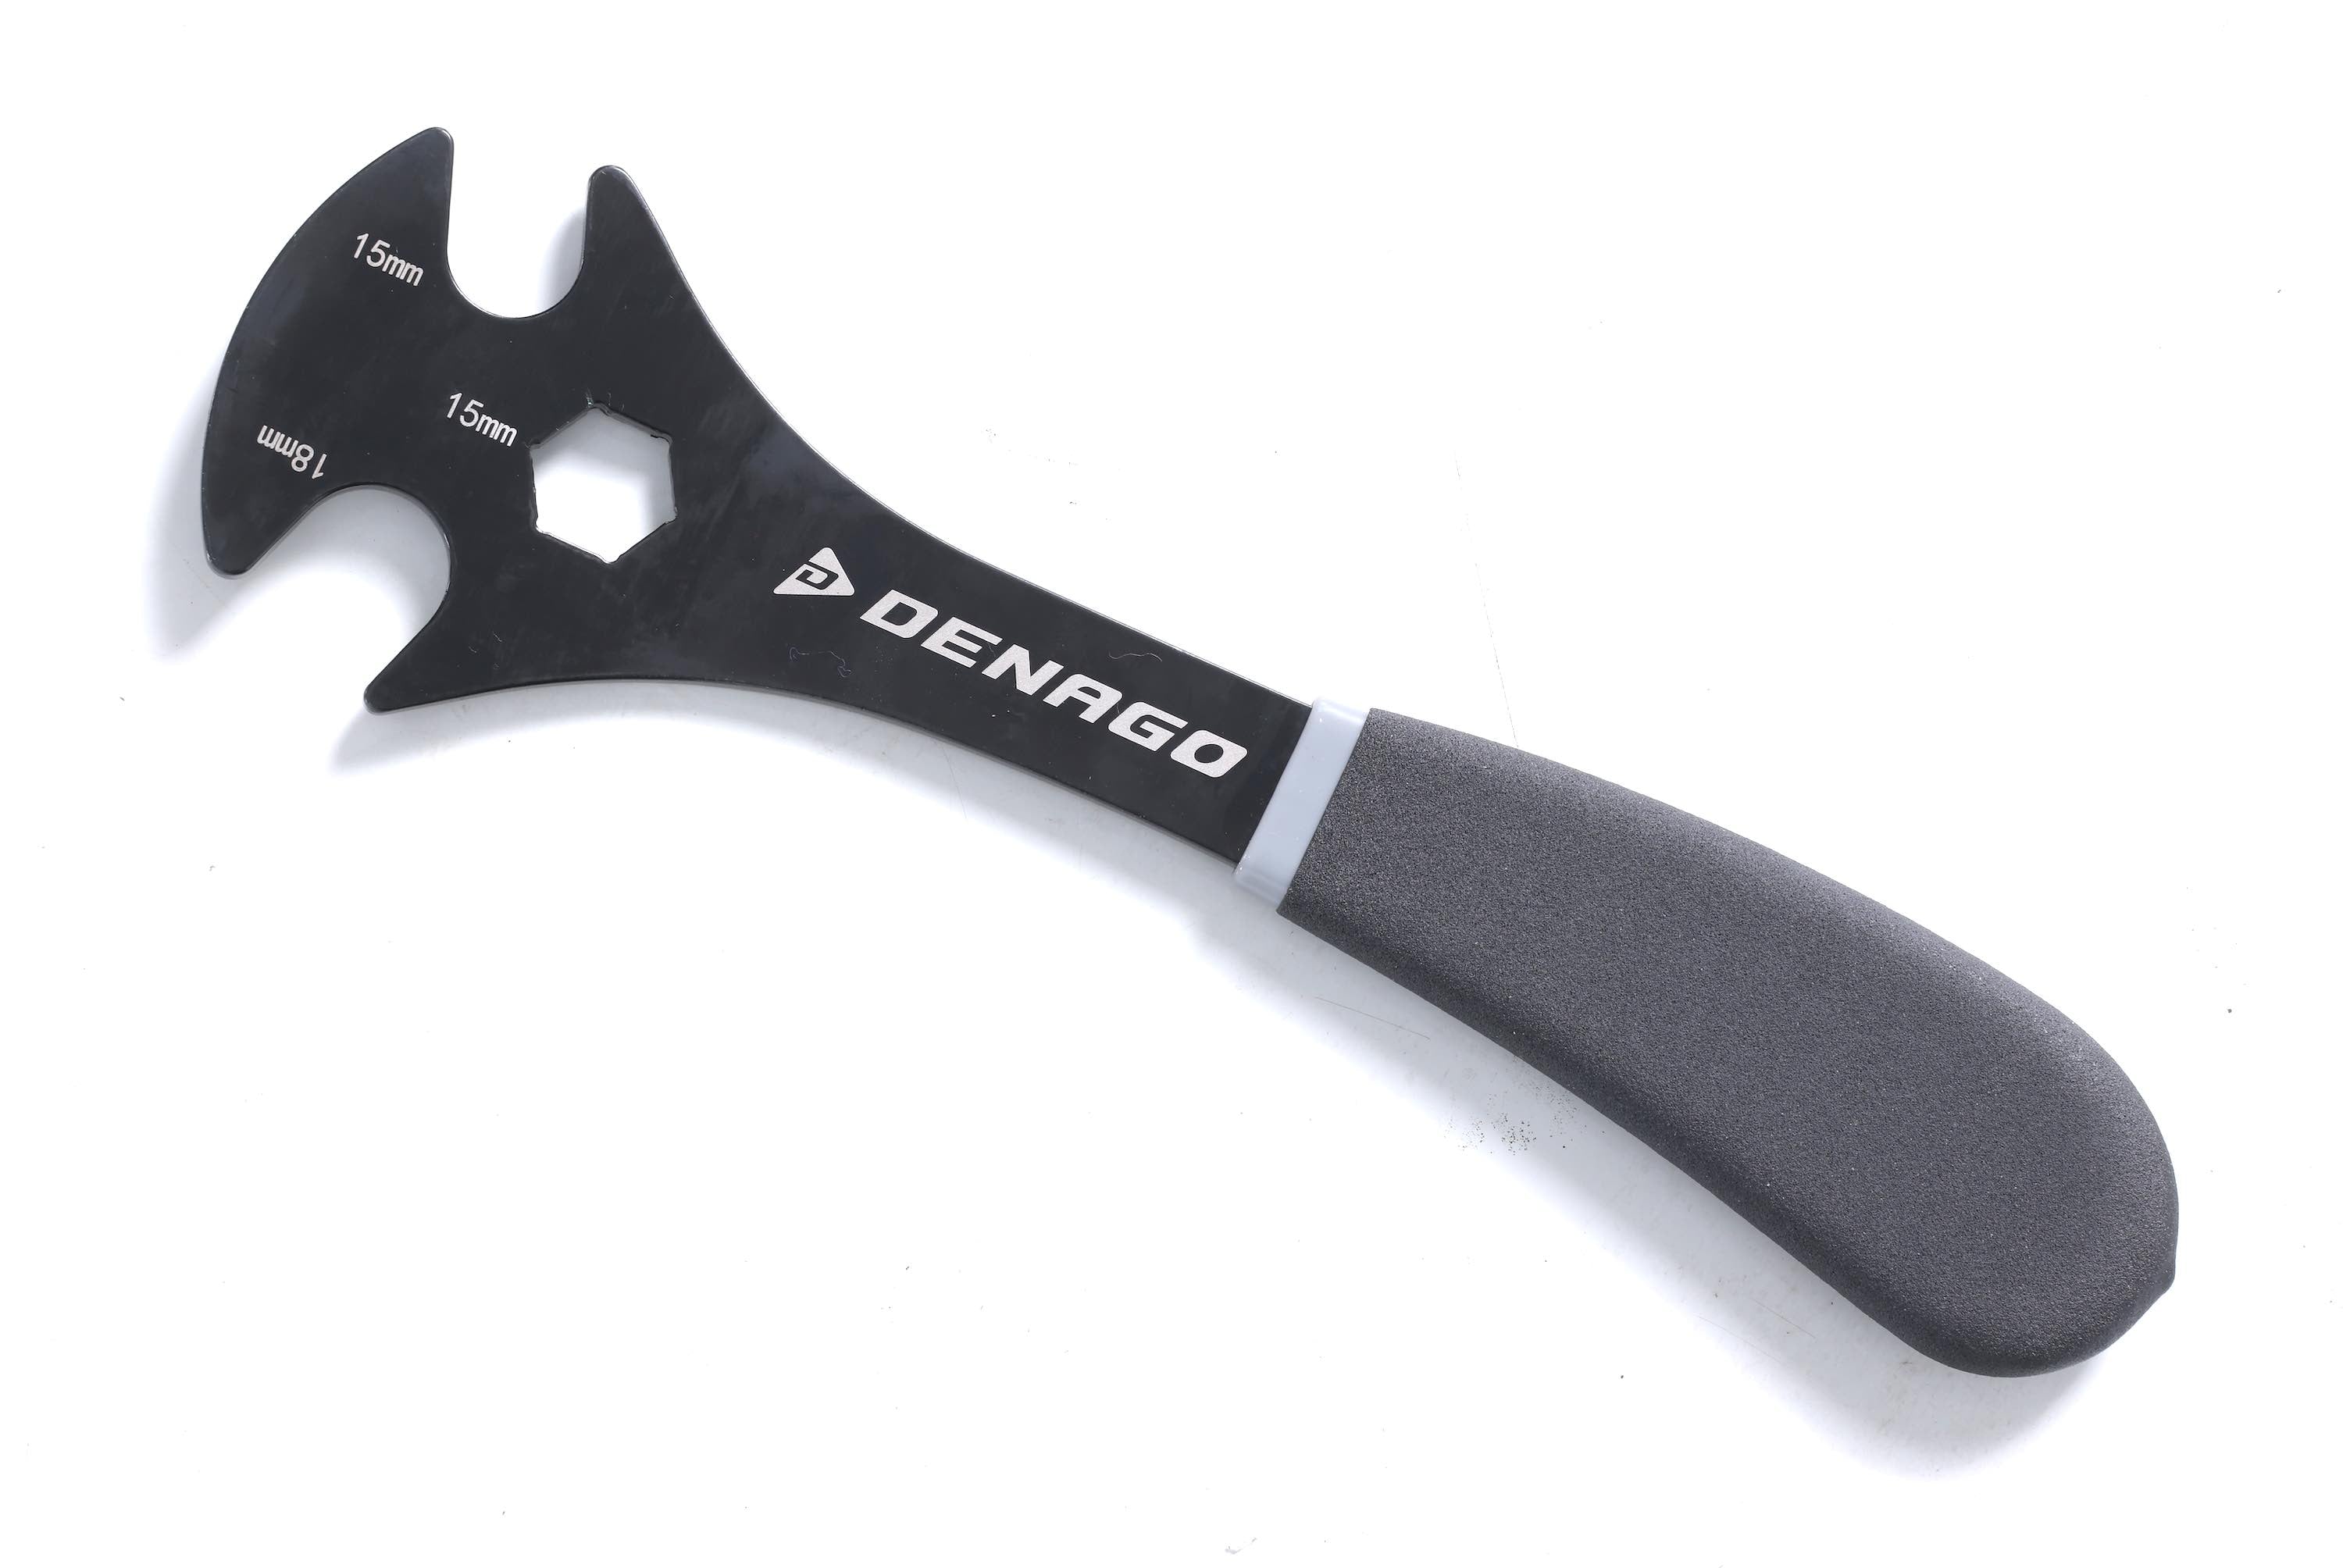 Denago Pedal and Axle Nut Wrench